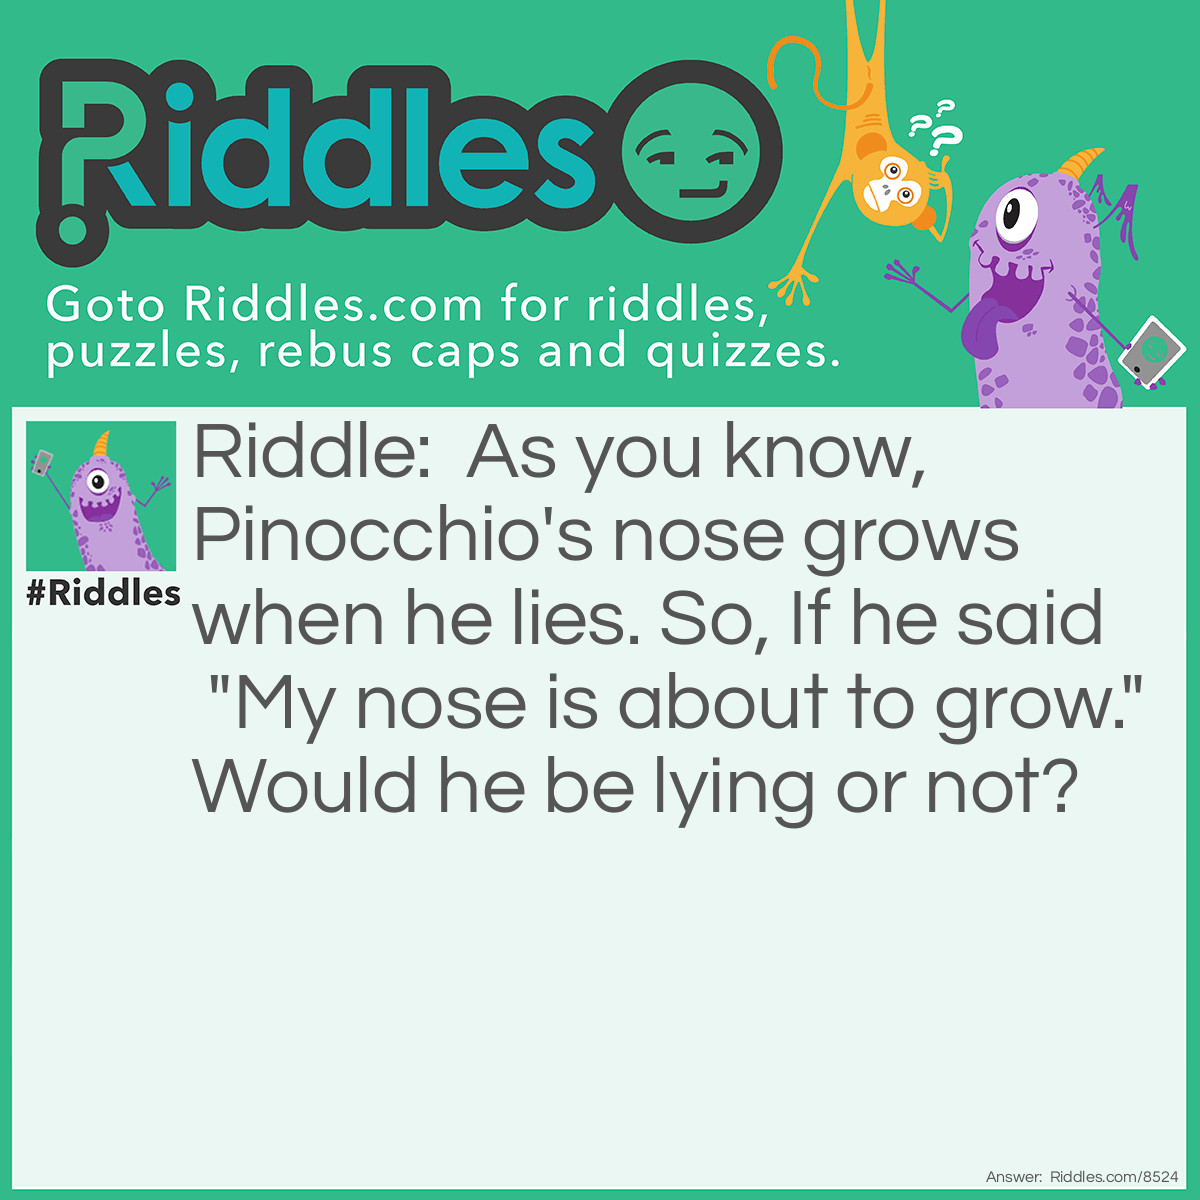 Riddle: As you know, Pinocchio's nose grows when he lies. So, If he said "My nose is about to grow." Would he be lying or not? Answer: Neither work. True: He's telling the truth so his nose wouldn't grow, Causing a lie. Lie: If he's lying, His nose WILL grow so it would be truth.